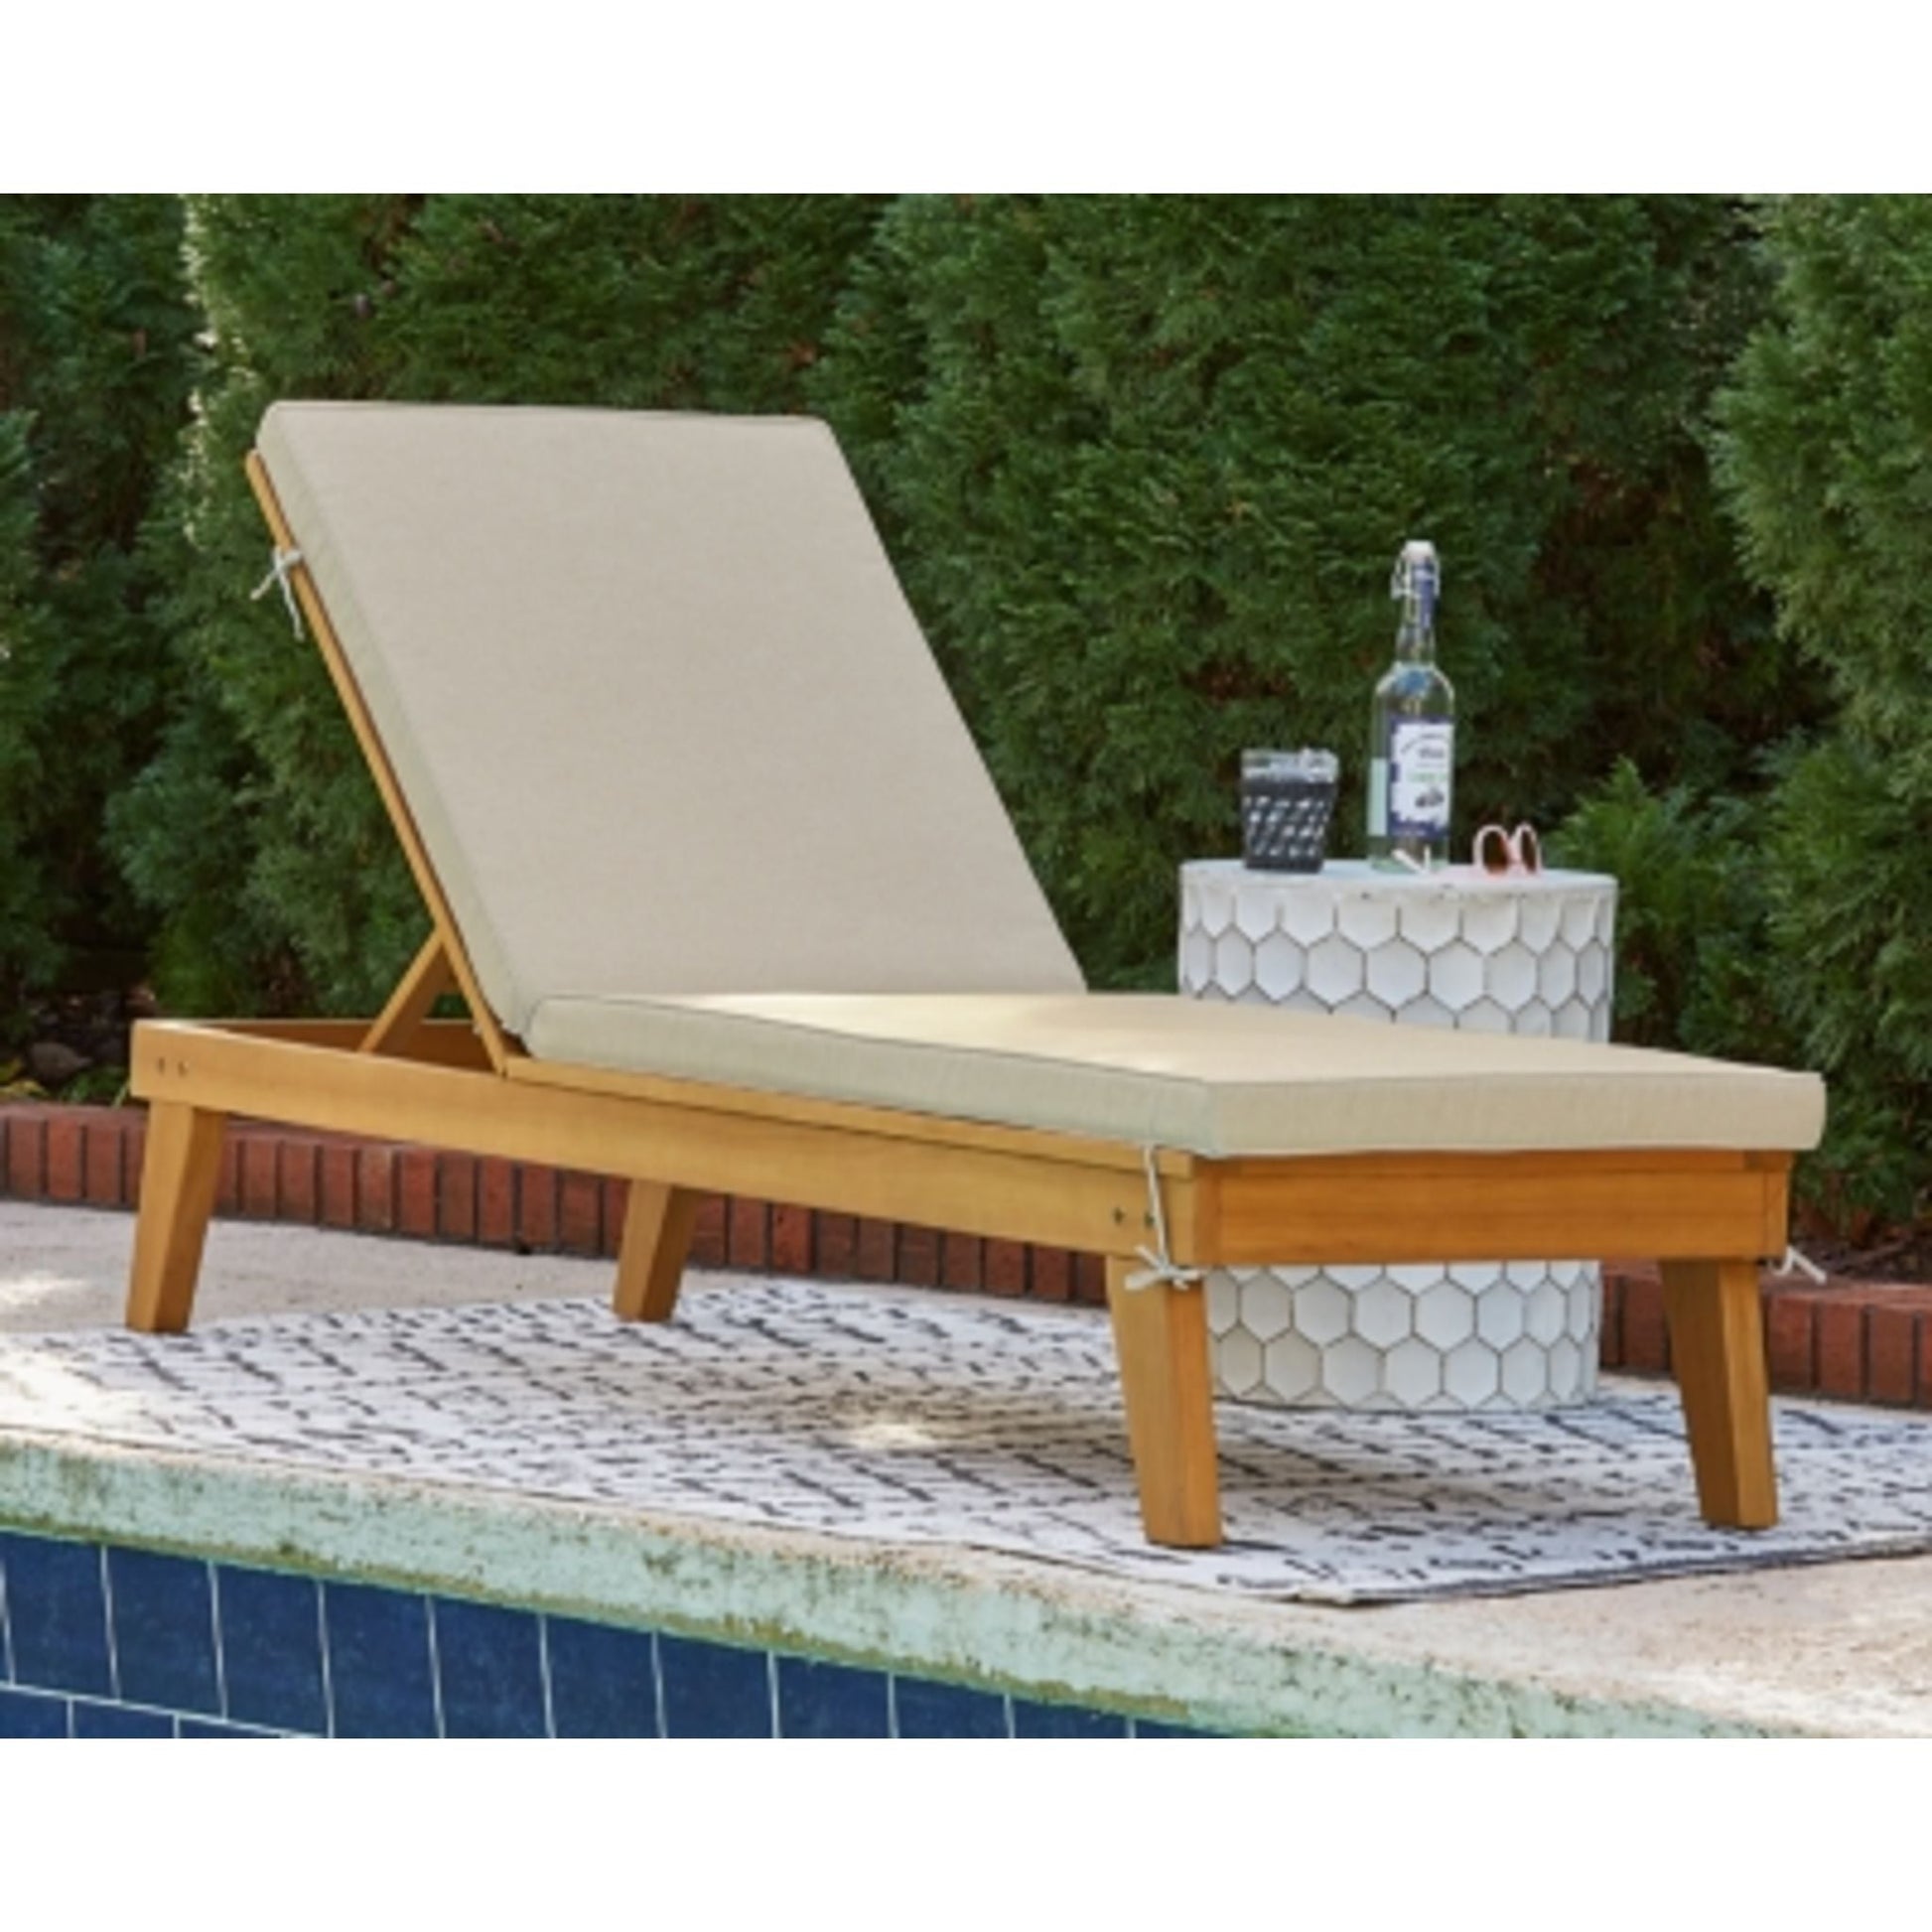 Outdoor Byron Bay Chaise Lounge Light Brown